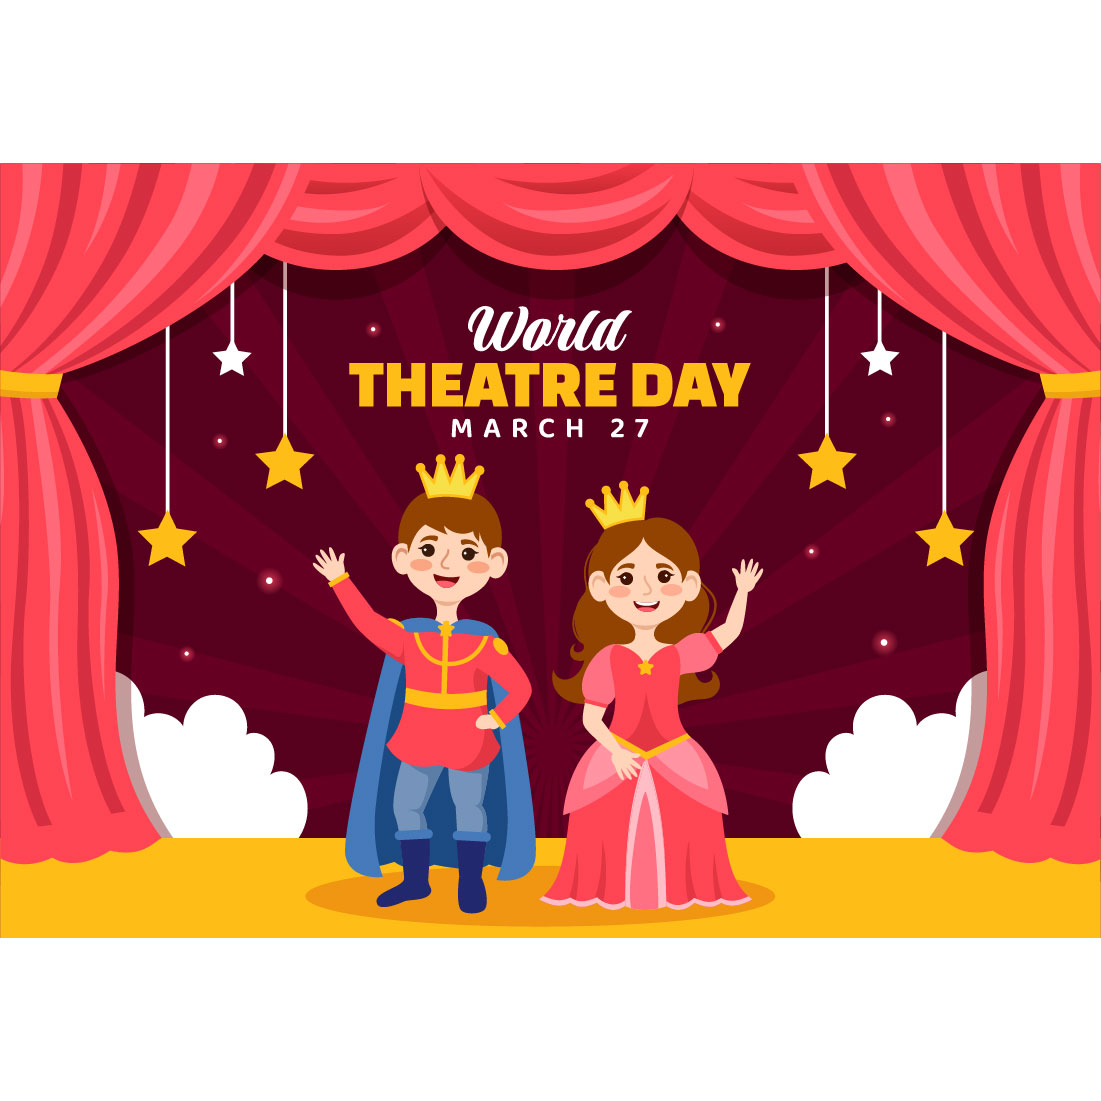 12 World Theatre Day Illustration cover image.